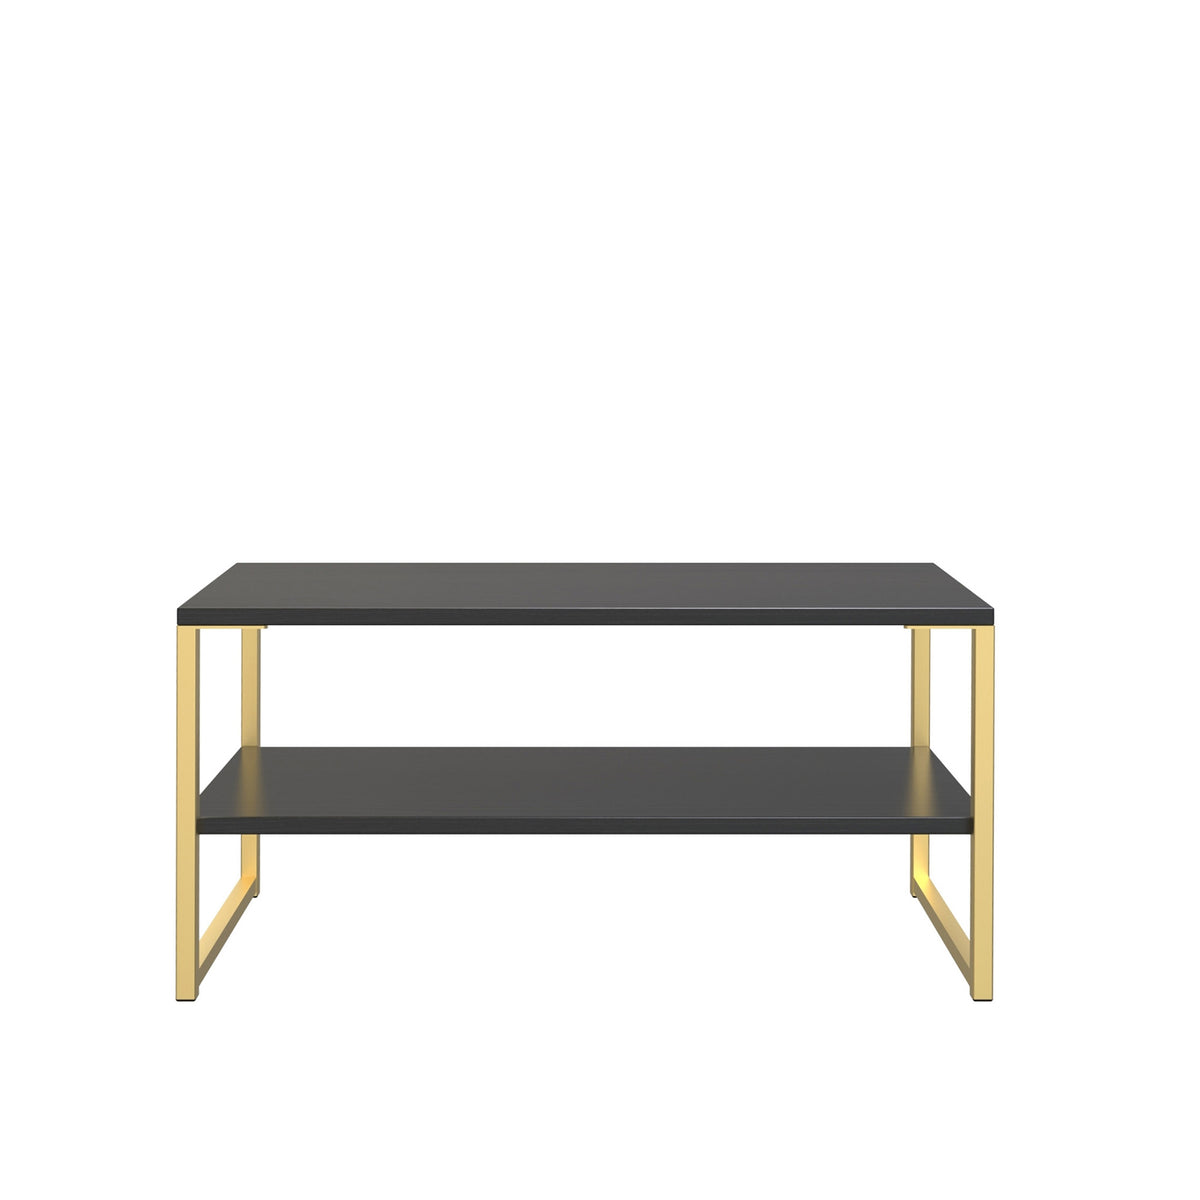 Hudson Black Coffee Table with Shelf and gold legs from Roseland